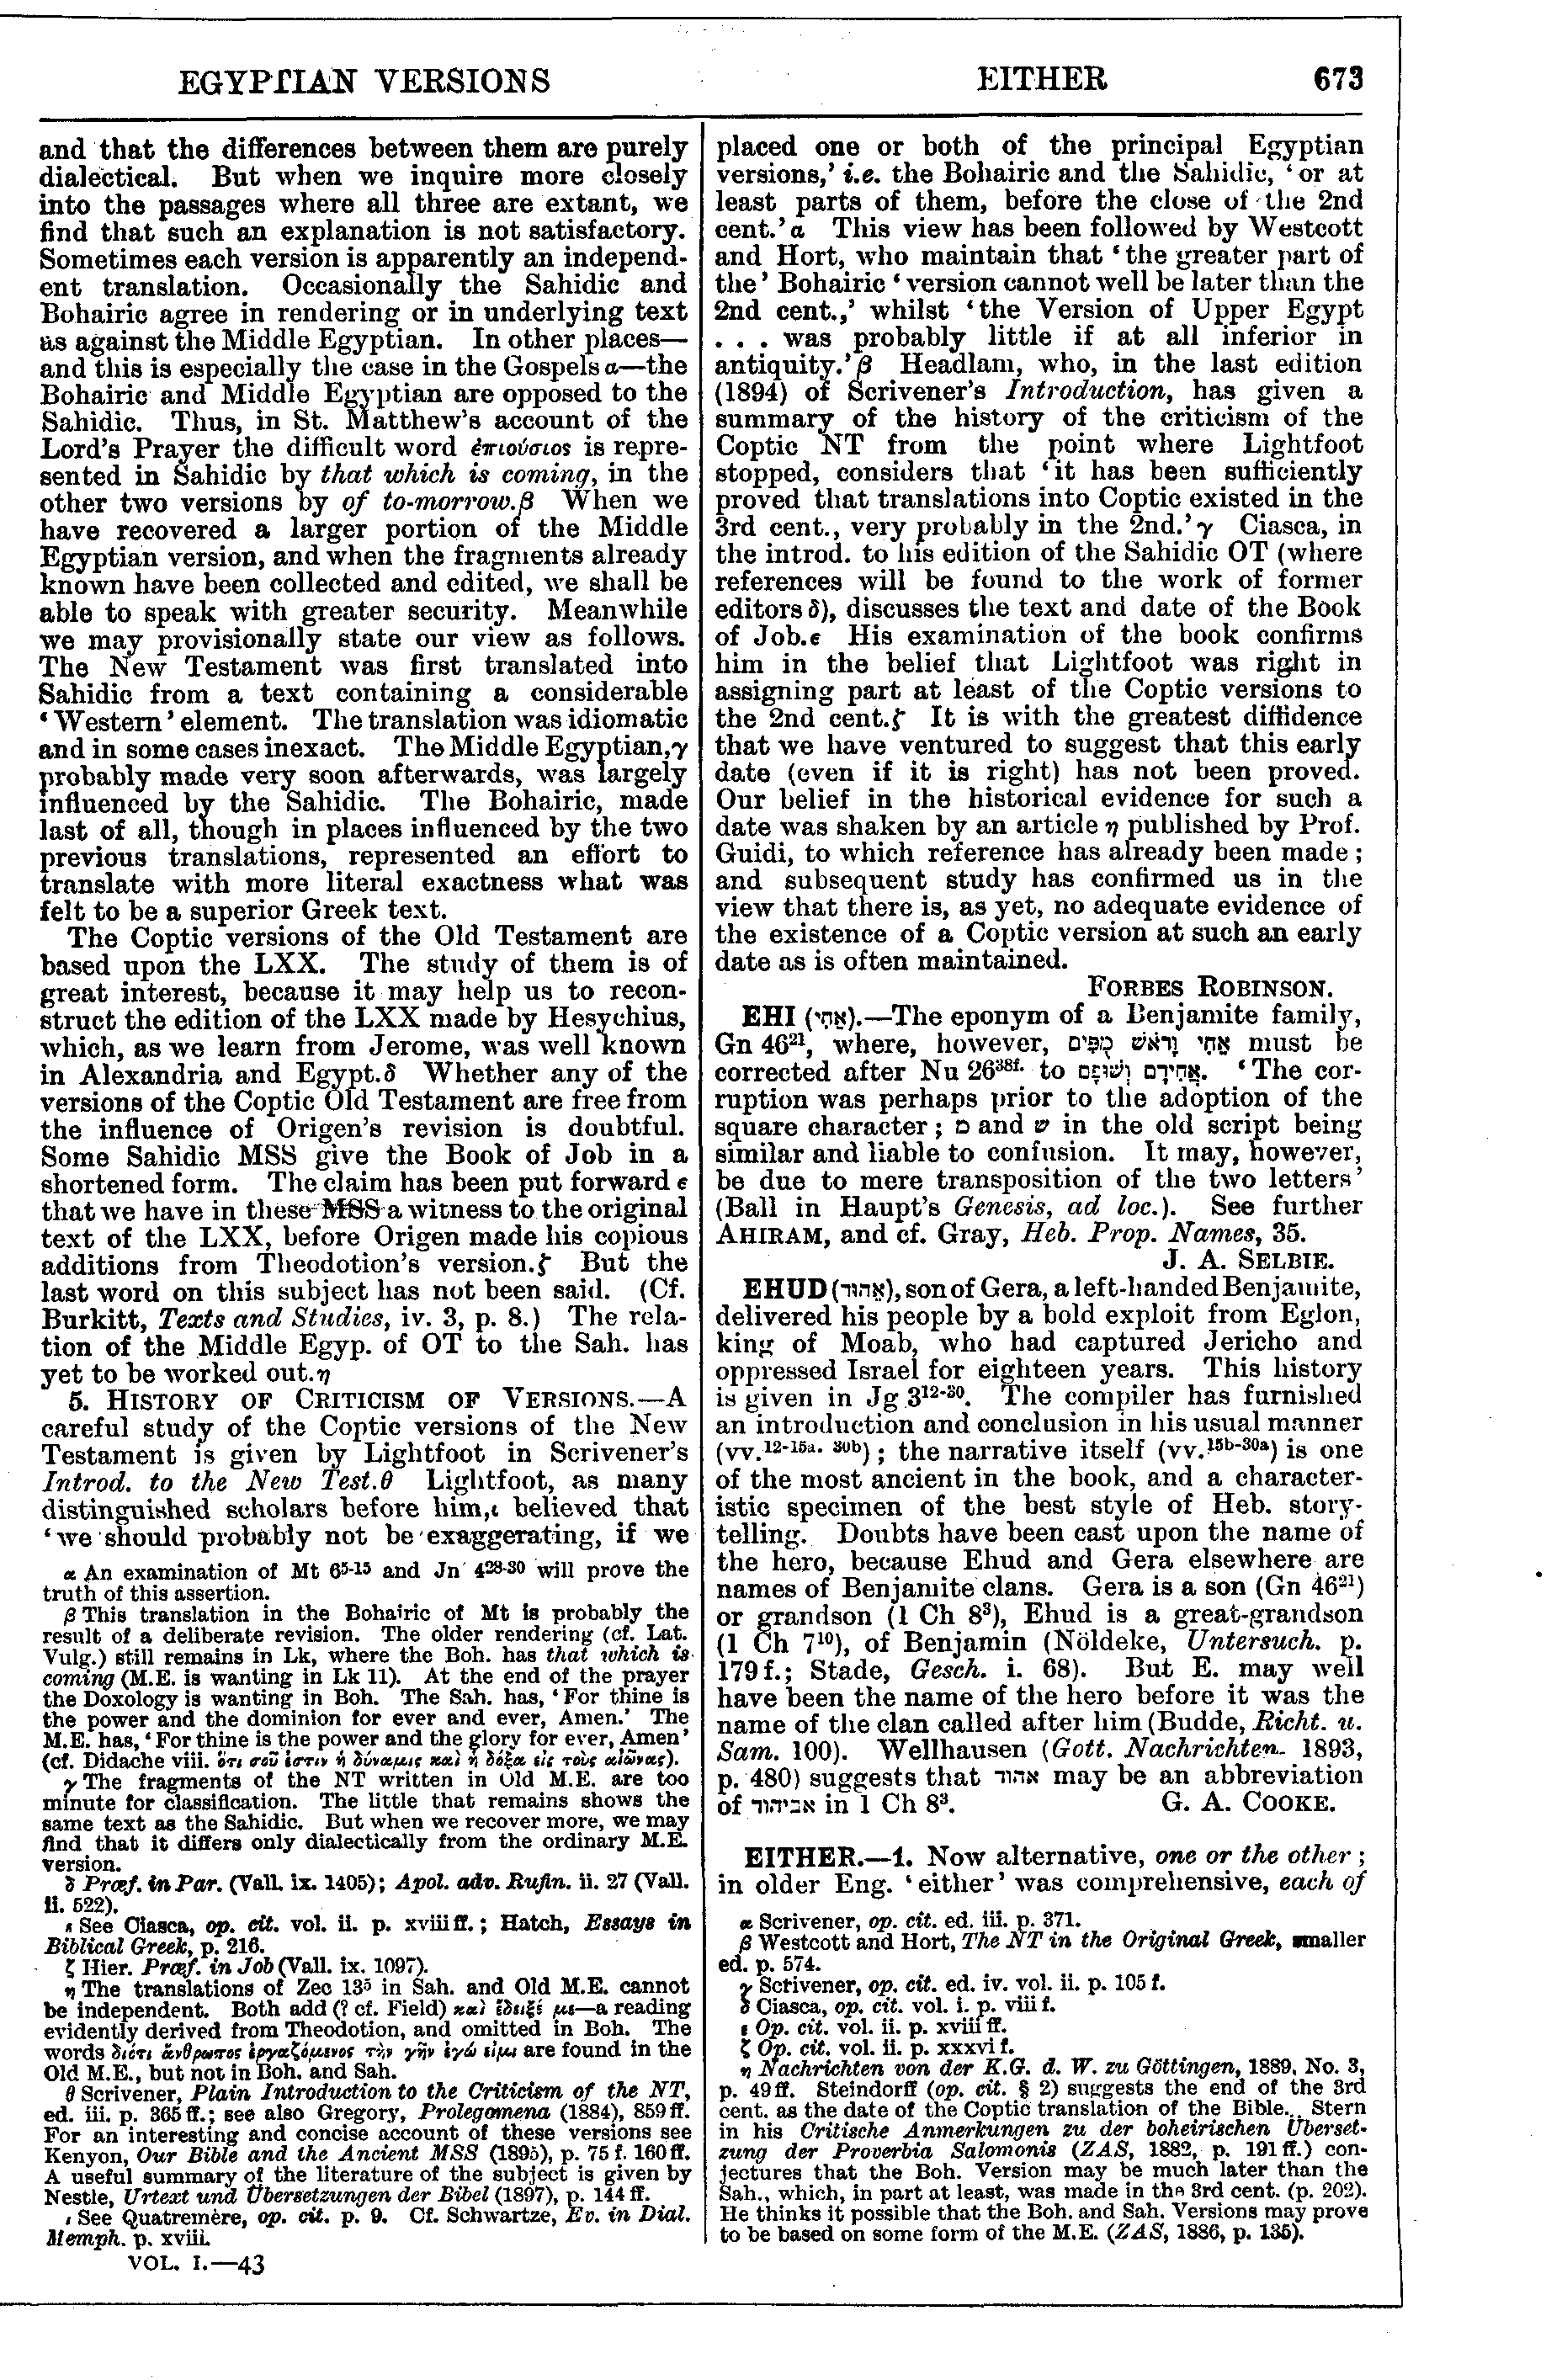 Image of page 673